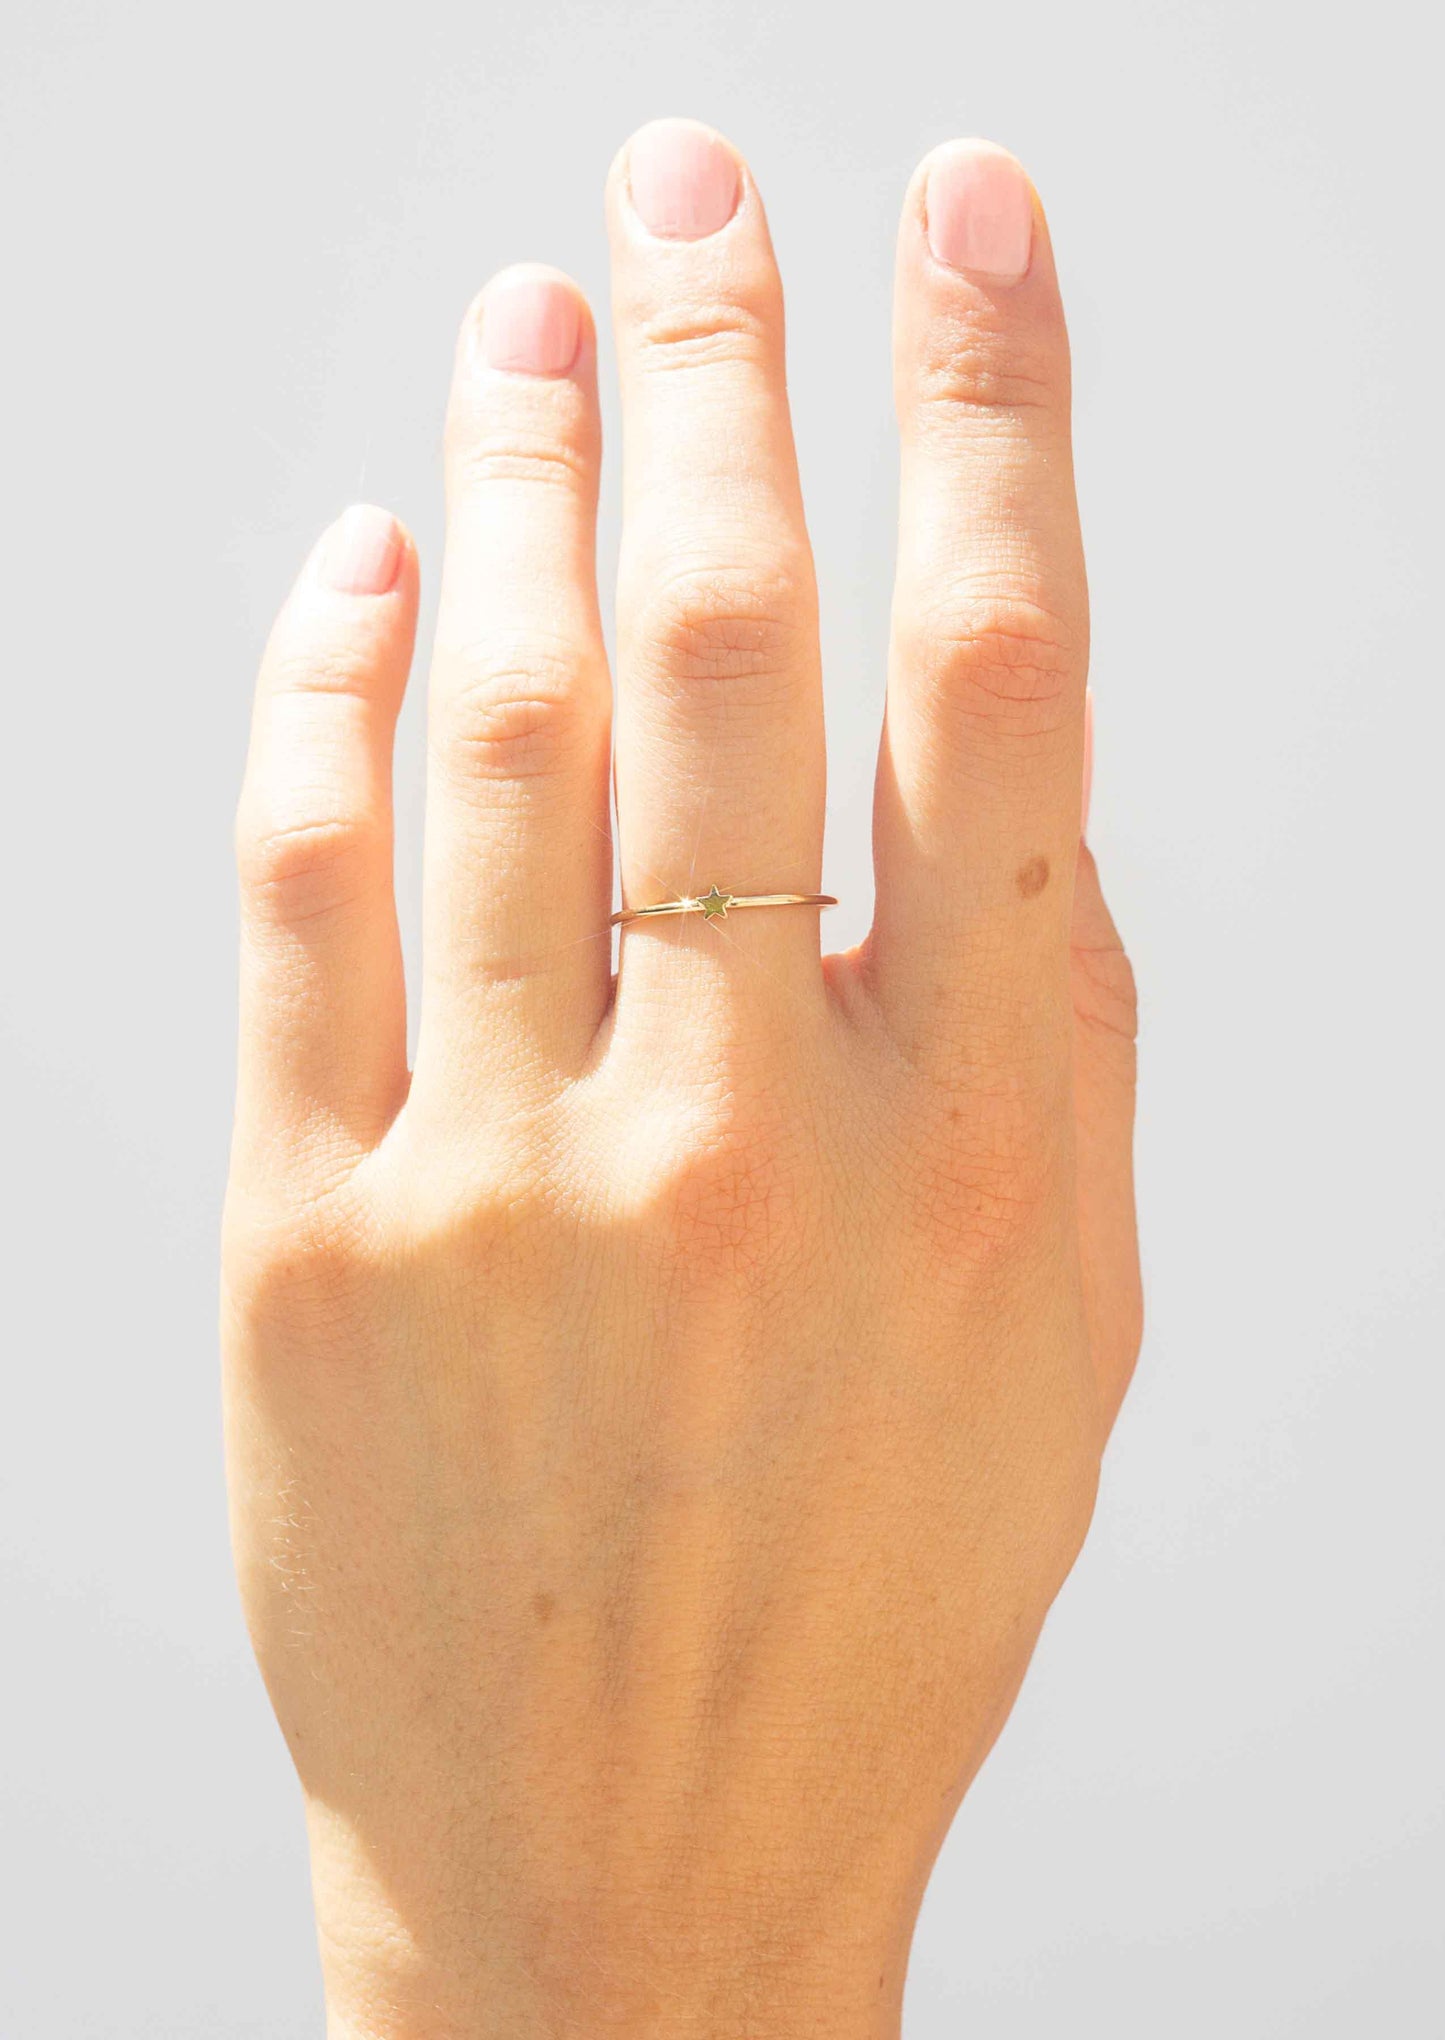 The Gold Teeny Star Ring